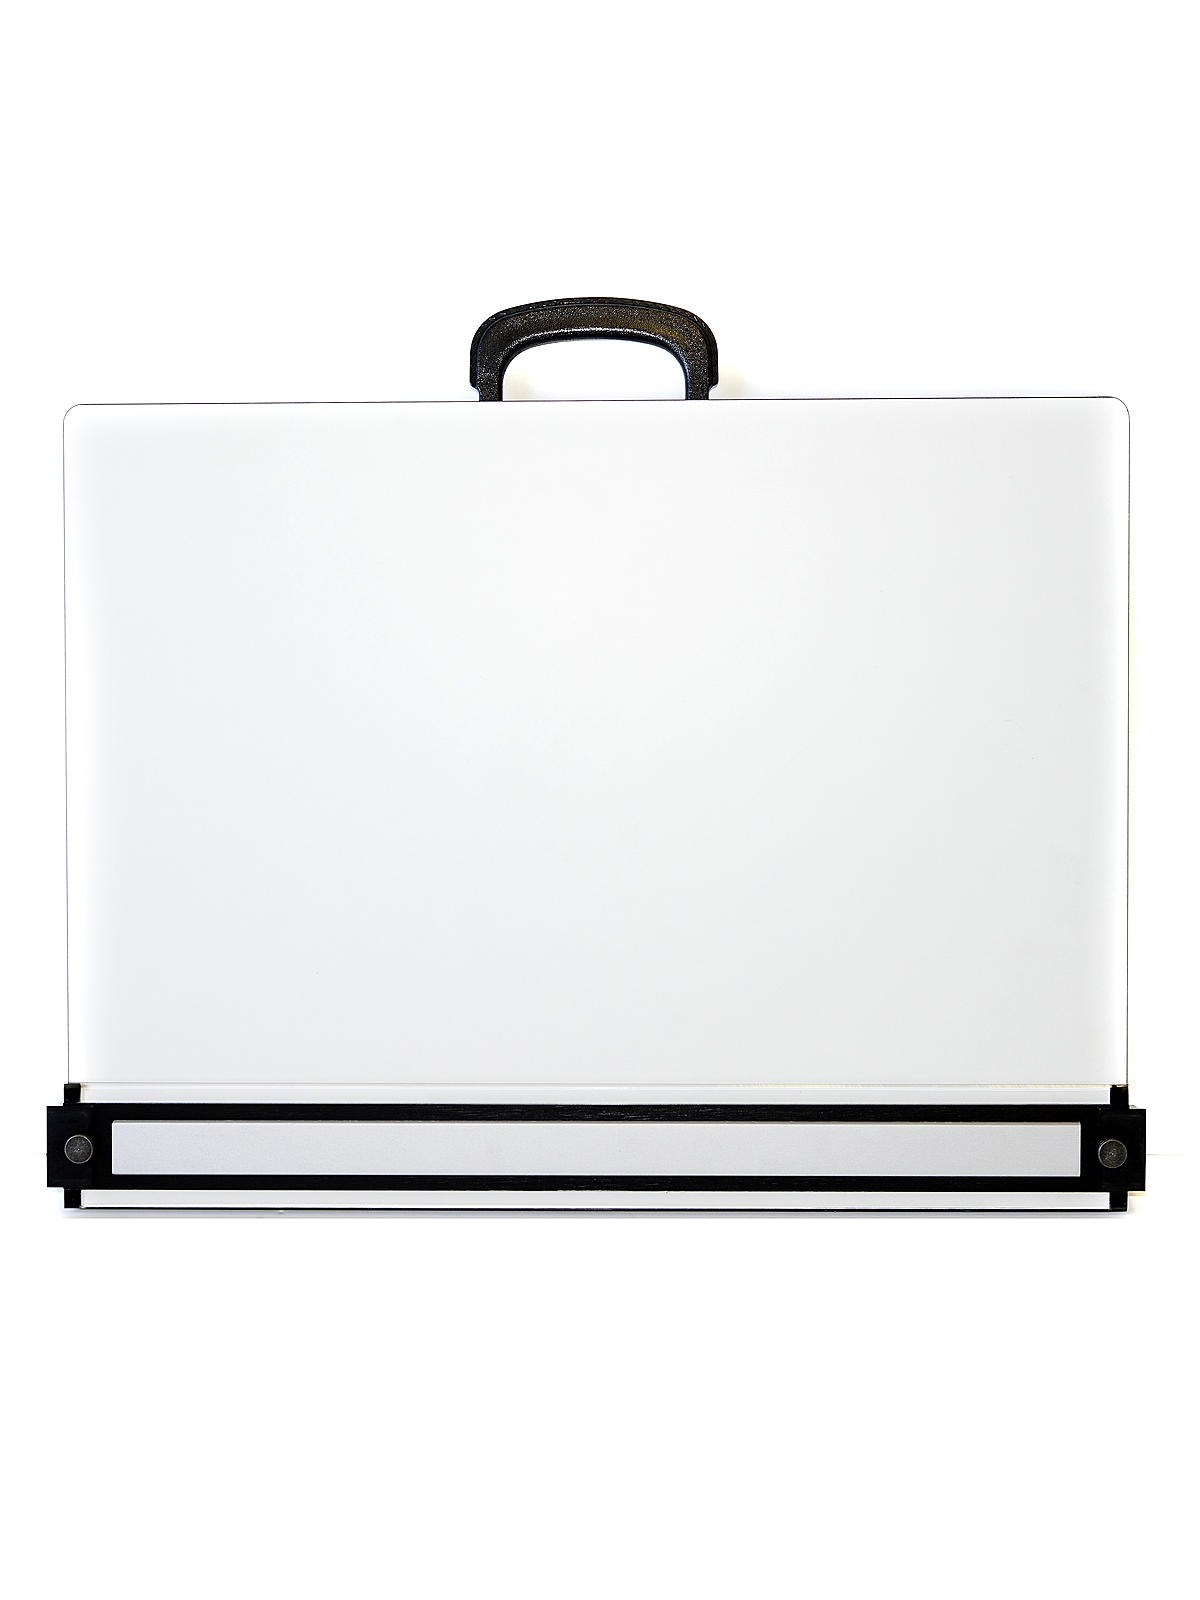 Drawing Board With Parallel Bar 16 In. X 21 In.